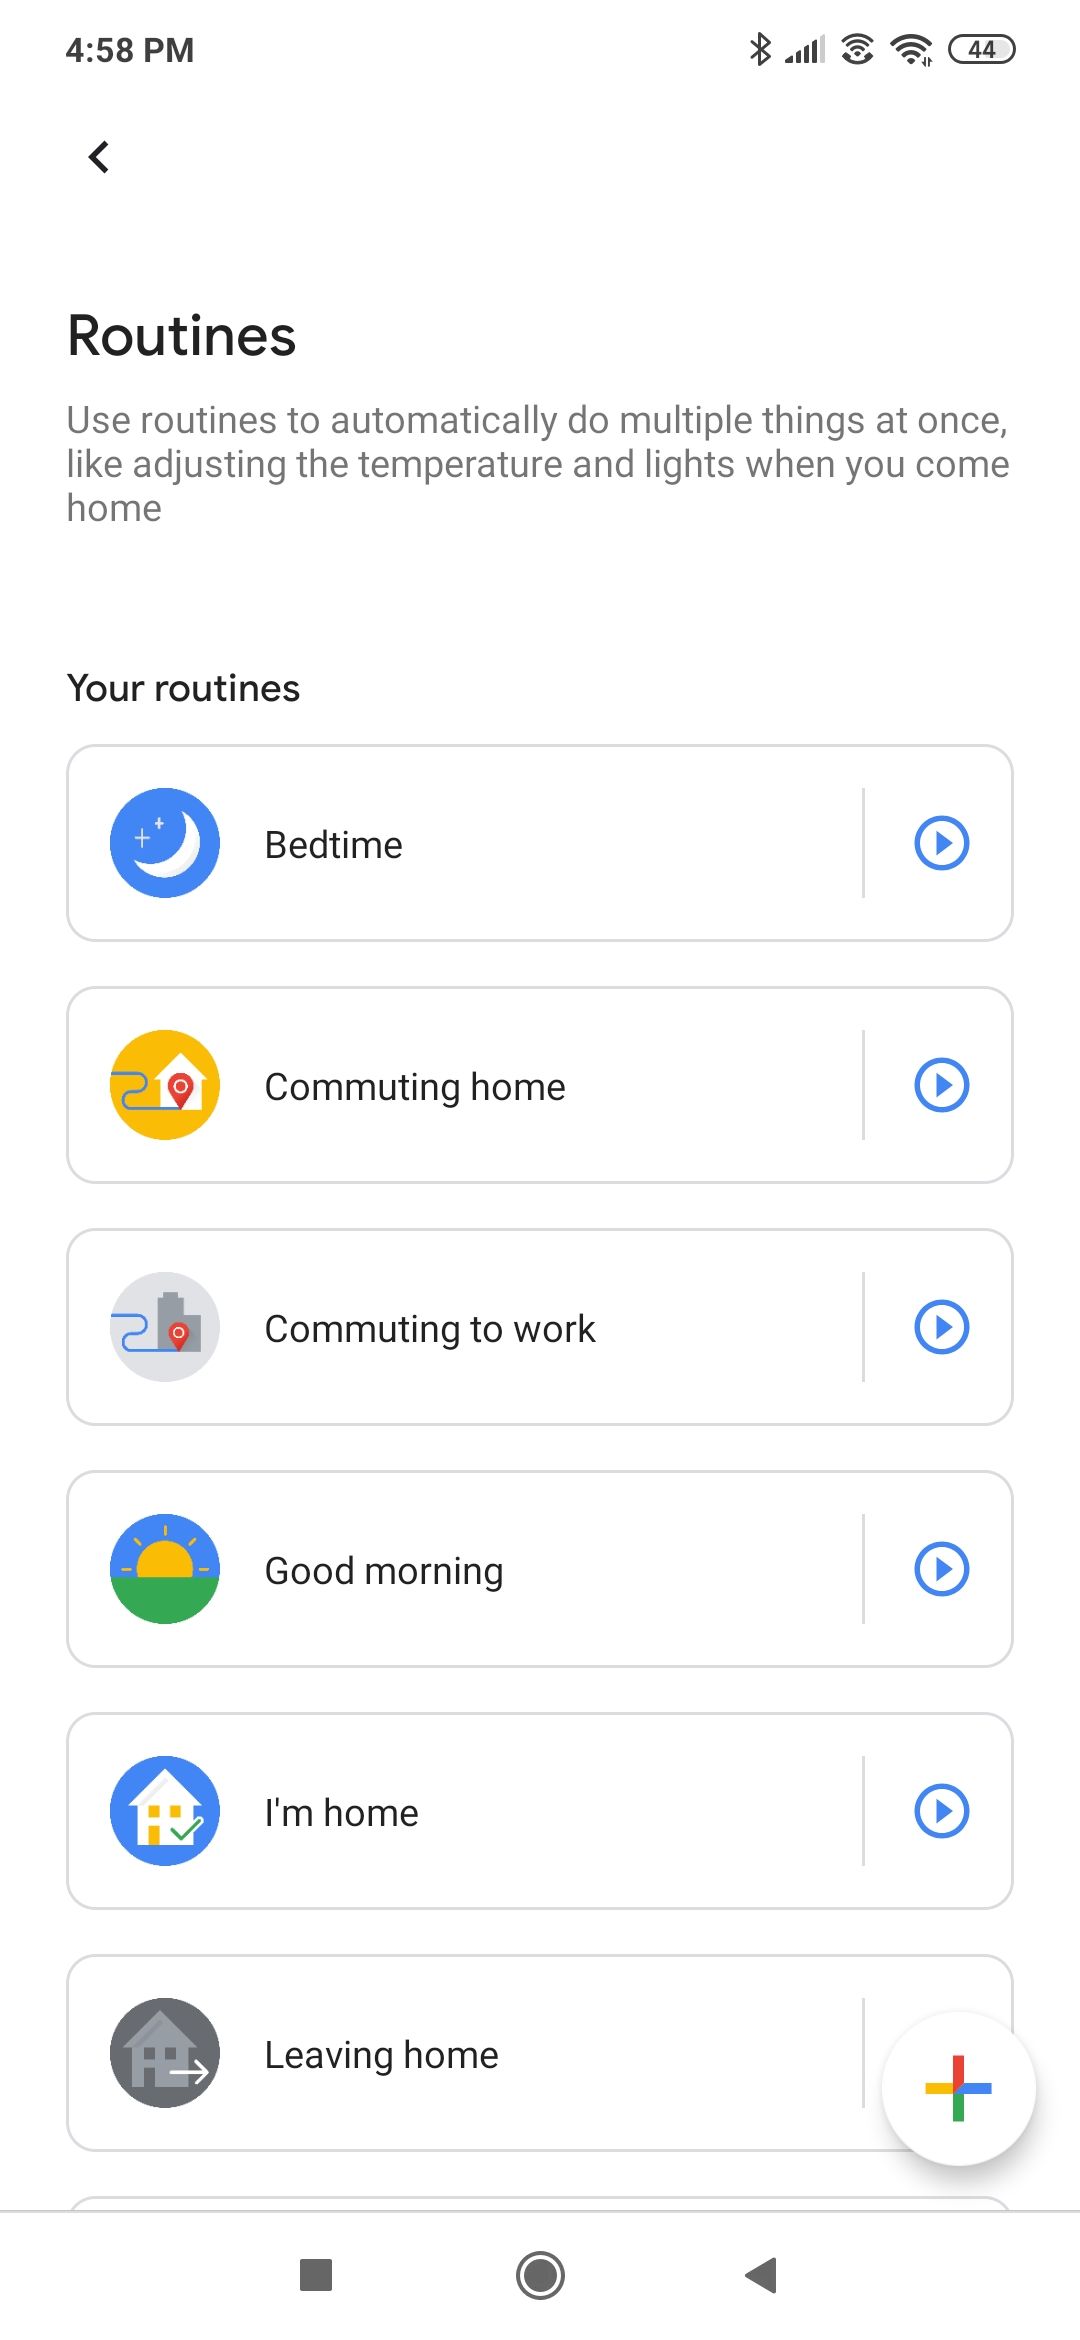 The Routines section of the Google Home app